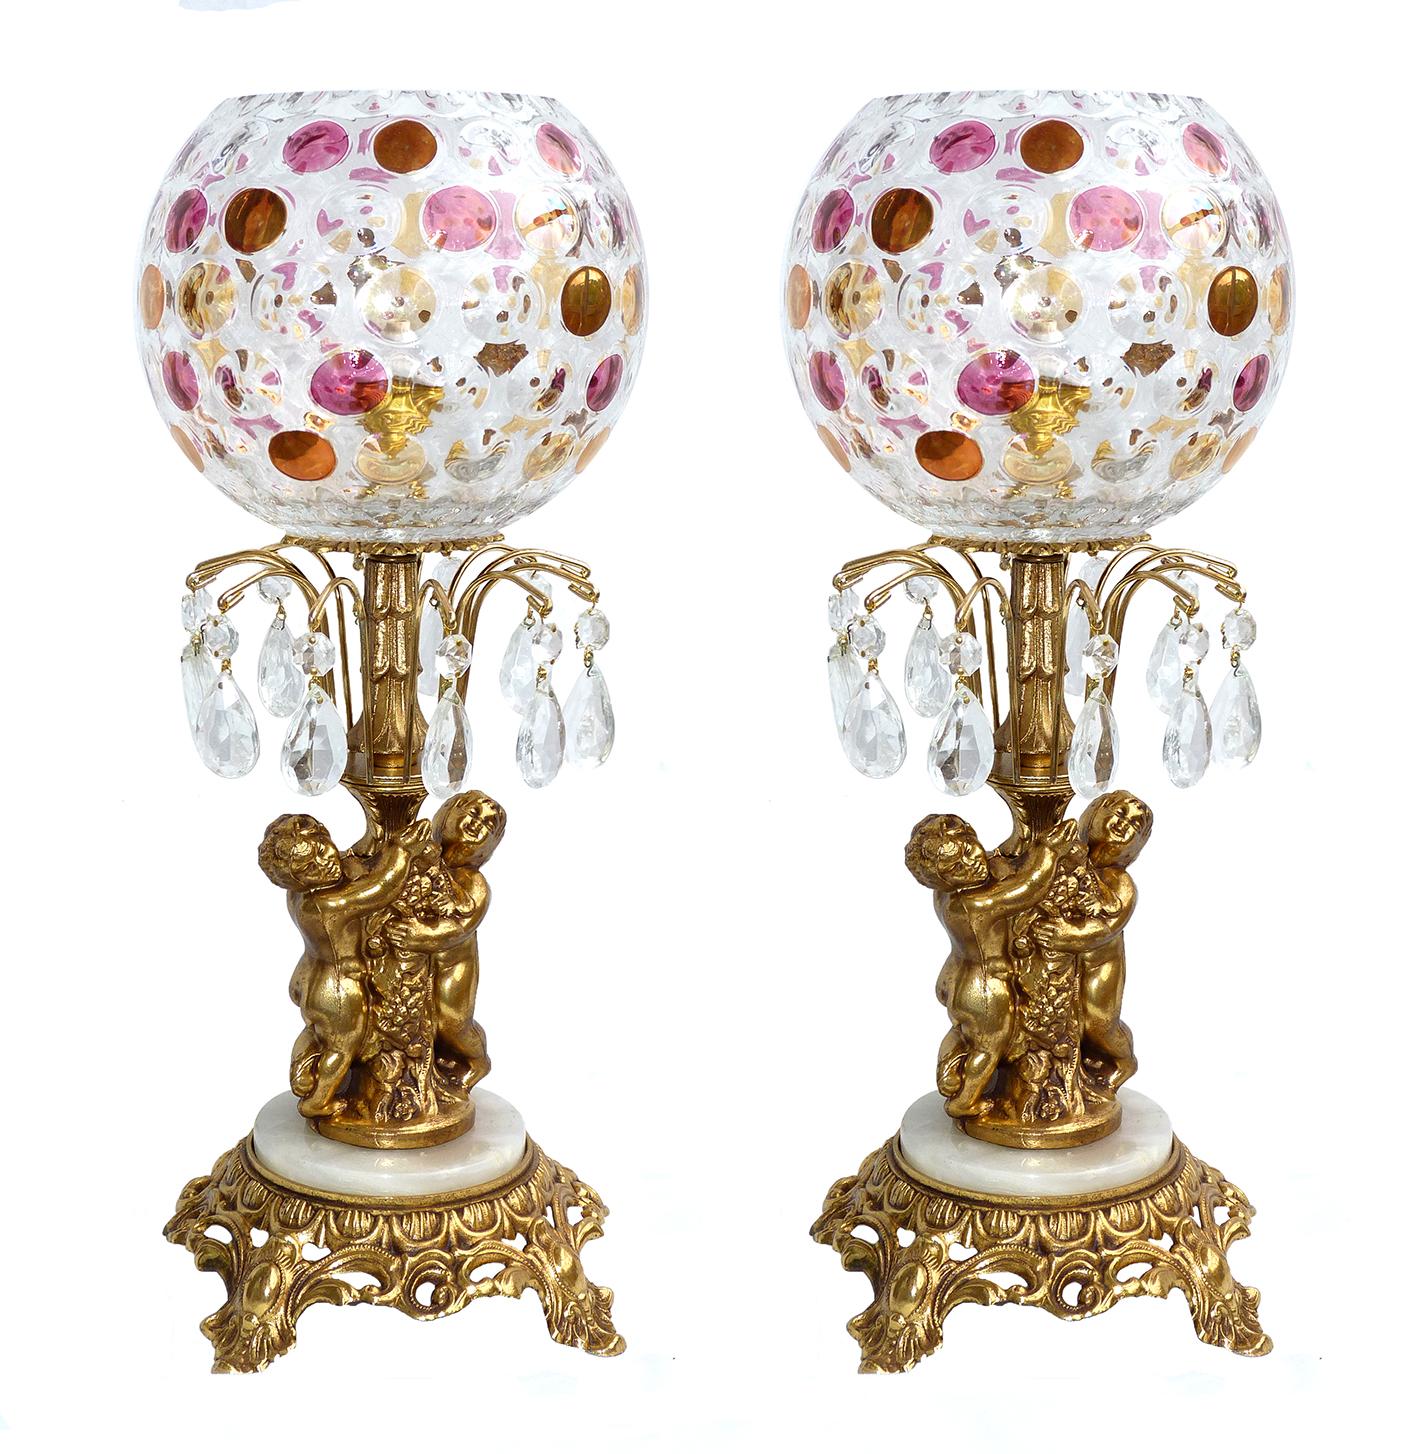 Gorgeous pair of Bohemian Regency Empire in gilt metal and colorful crystal table lamps
Housing one-light bulb each E14.
Measures:
Height 18 in /45 cm
Diameter 8 in /20 cm
Two light bulbs ( E14 )
Good working condition / US wiring.
Assembly